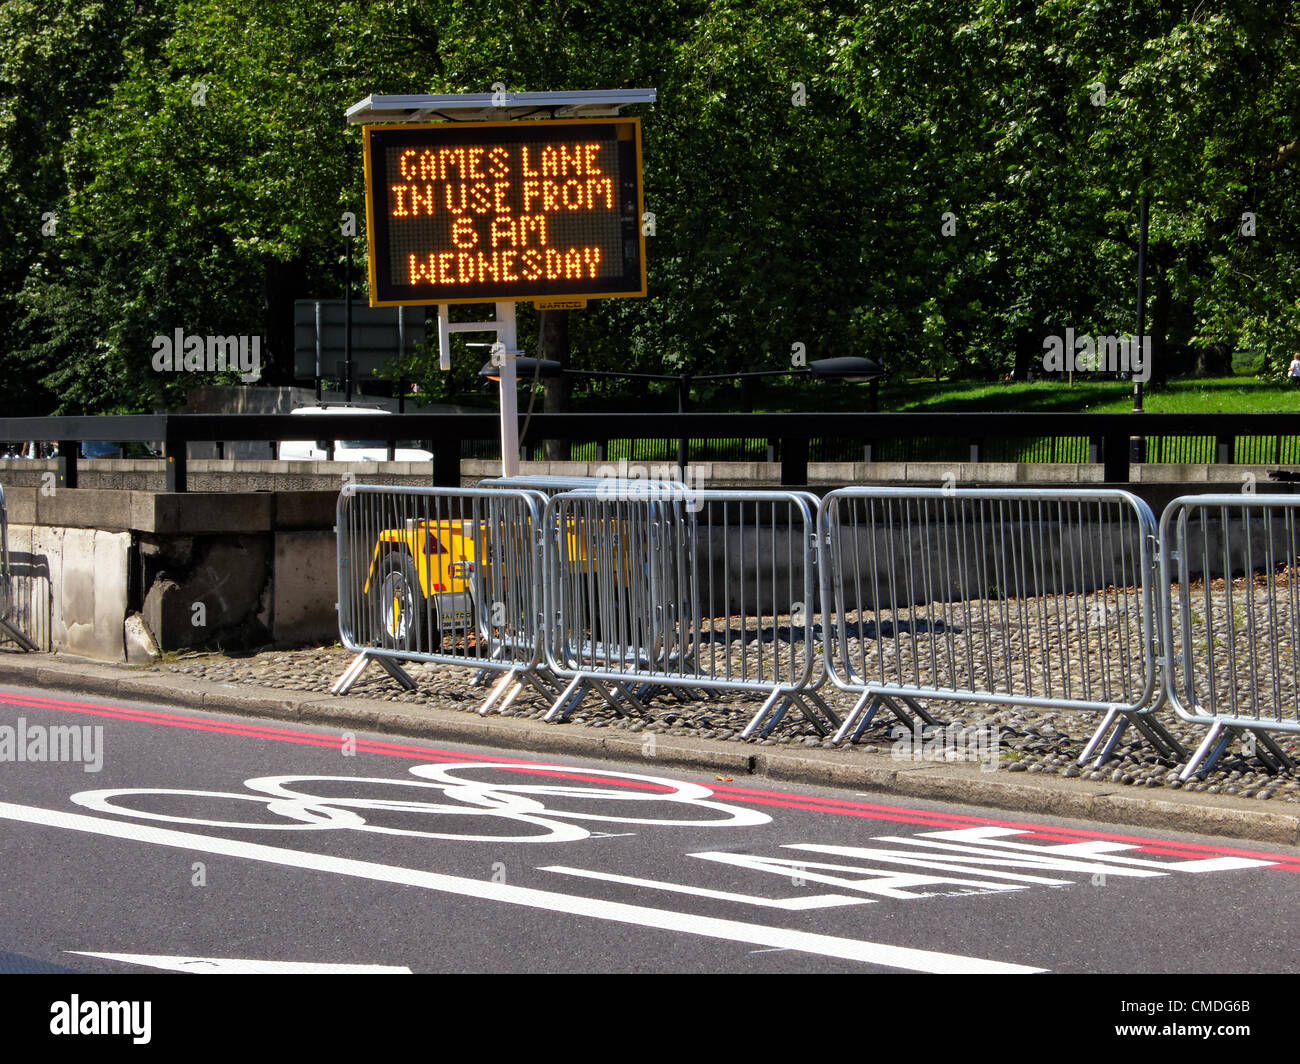 Monday July 23, 2012. Sign warning that the Olympic lanes will be in used starting Wednesday July 25 at 6am. The London 2012 Olympic Games will be officially opened on Friday July 27, 2012 at 9pm. Stock Photo